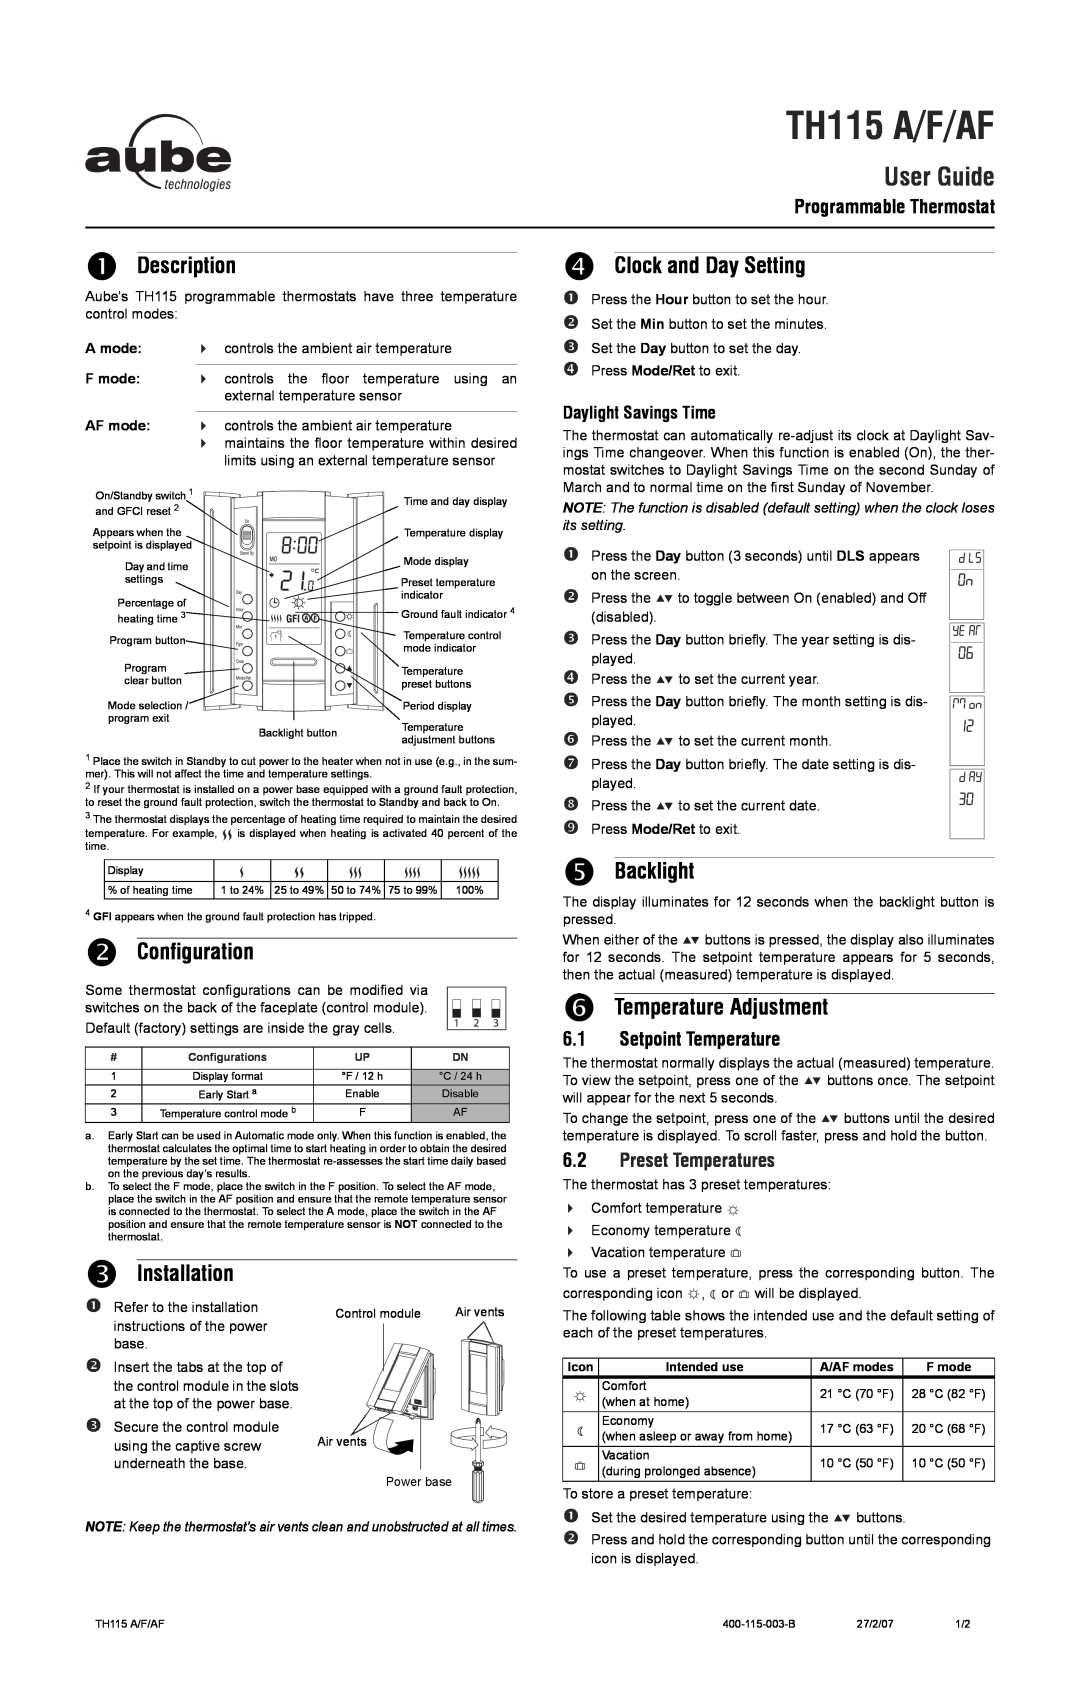 Aube Technologies TH115 installation instructions n Description, o Configuration, p Installation, q Clock and Day Setting 